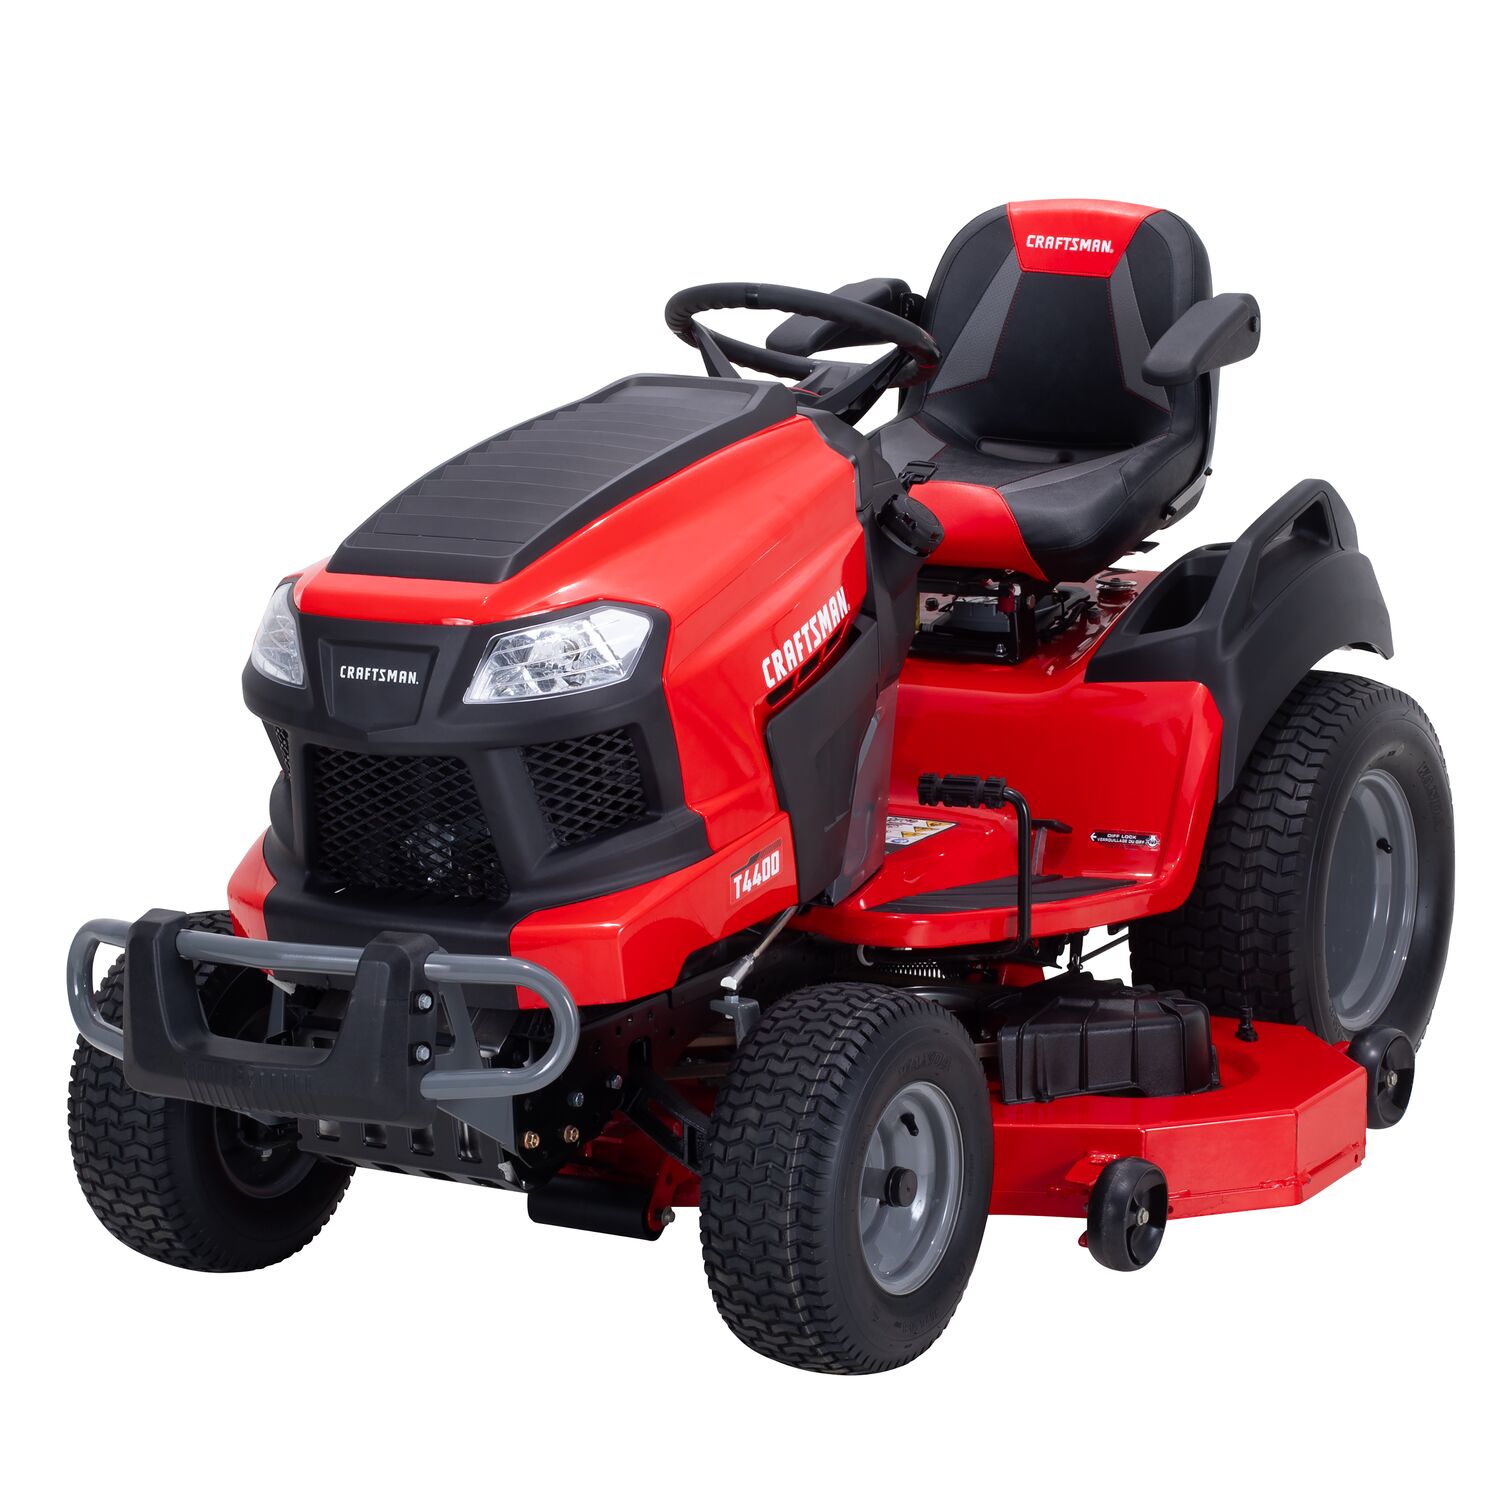 CRAFTSMAN T4400 54-in 24-HP V-twin Riding Lawn Mower in the Gas Riding ...